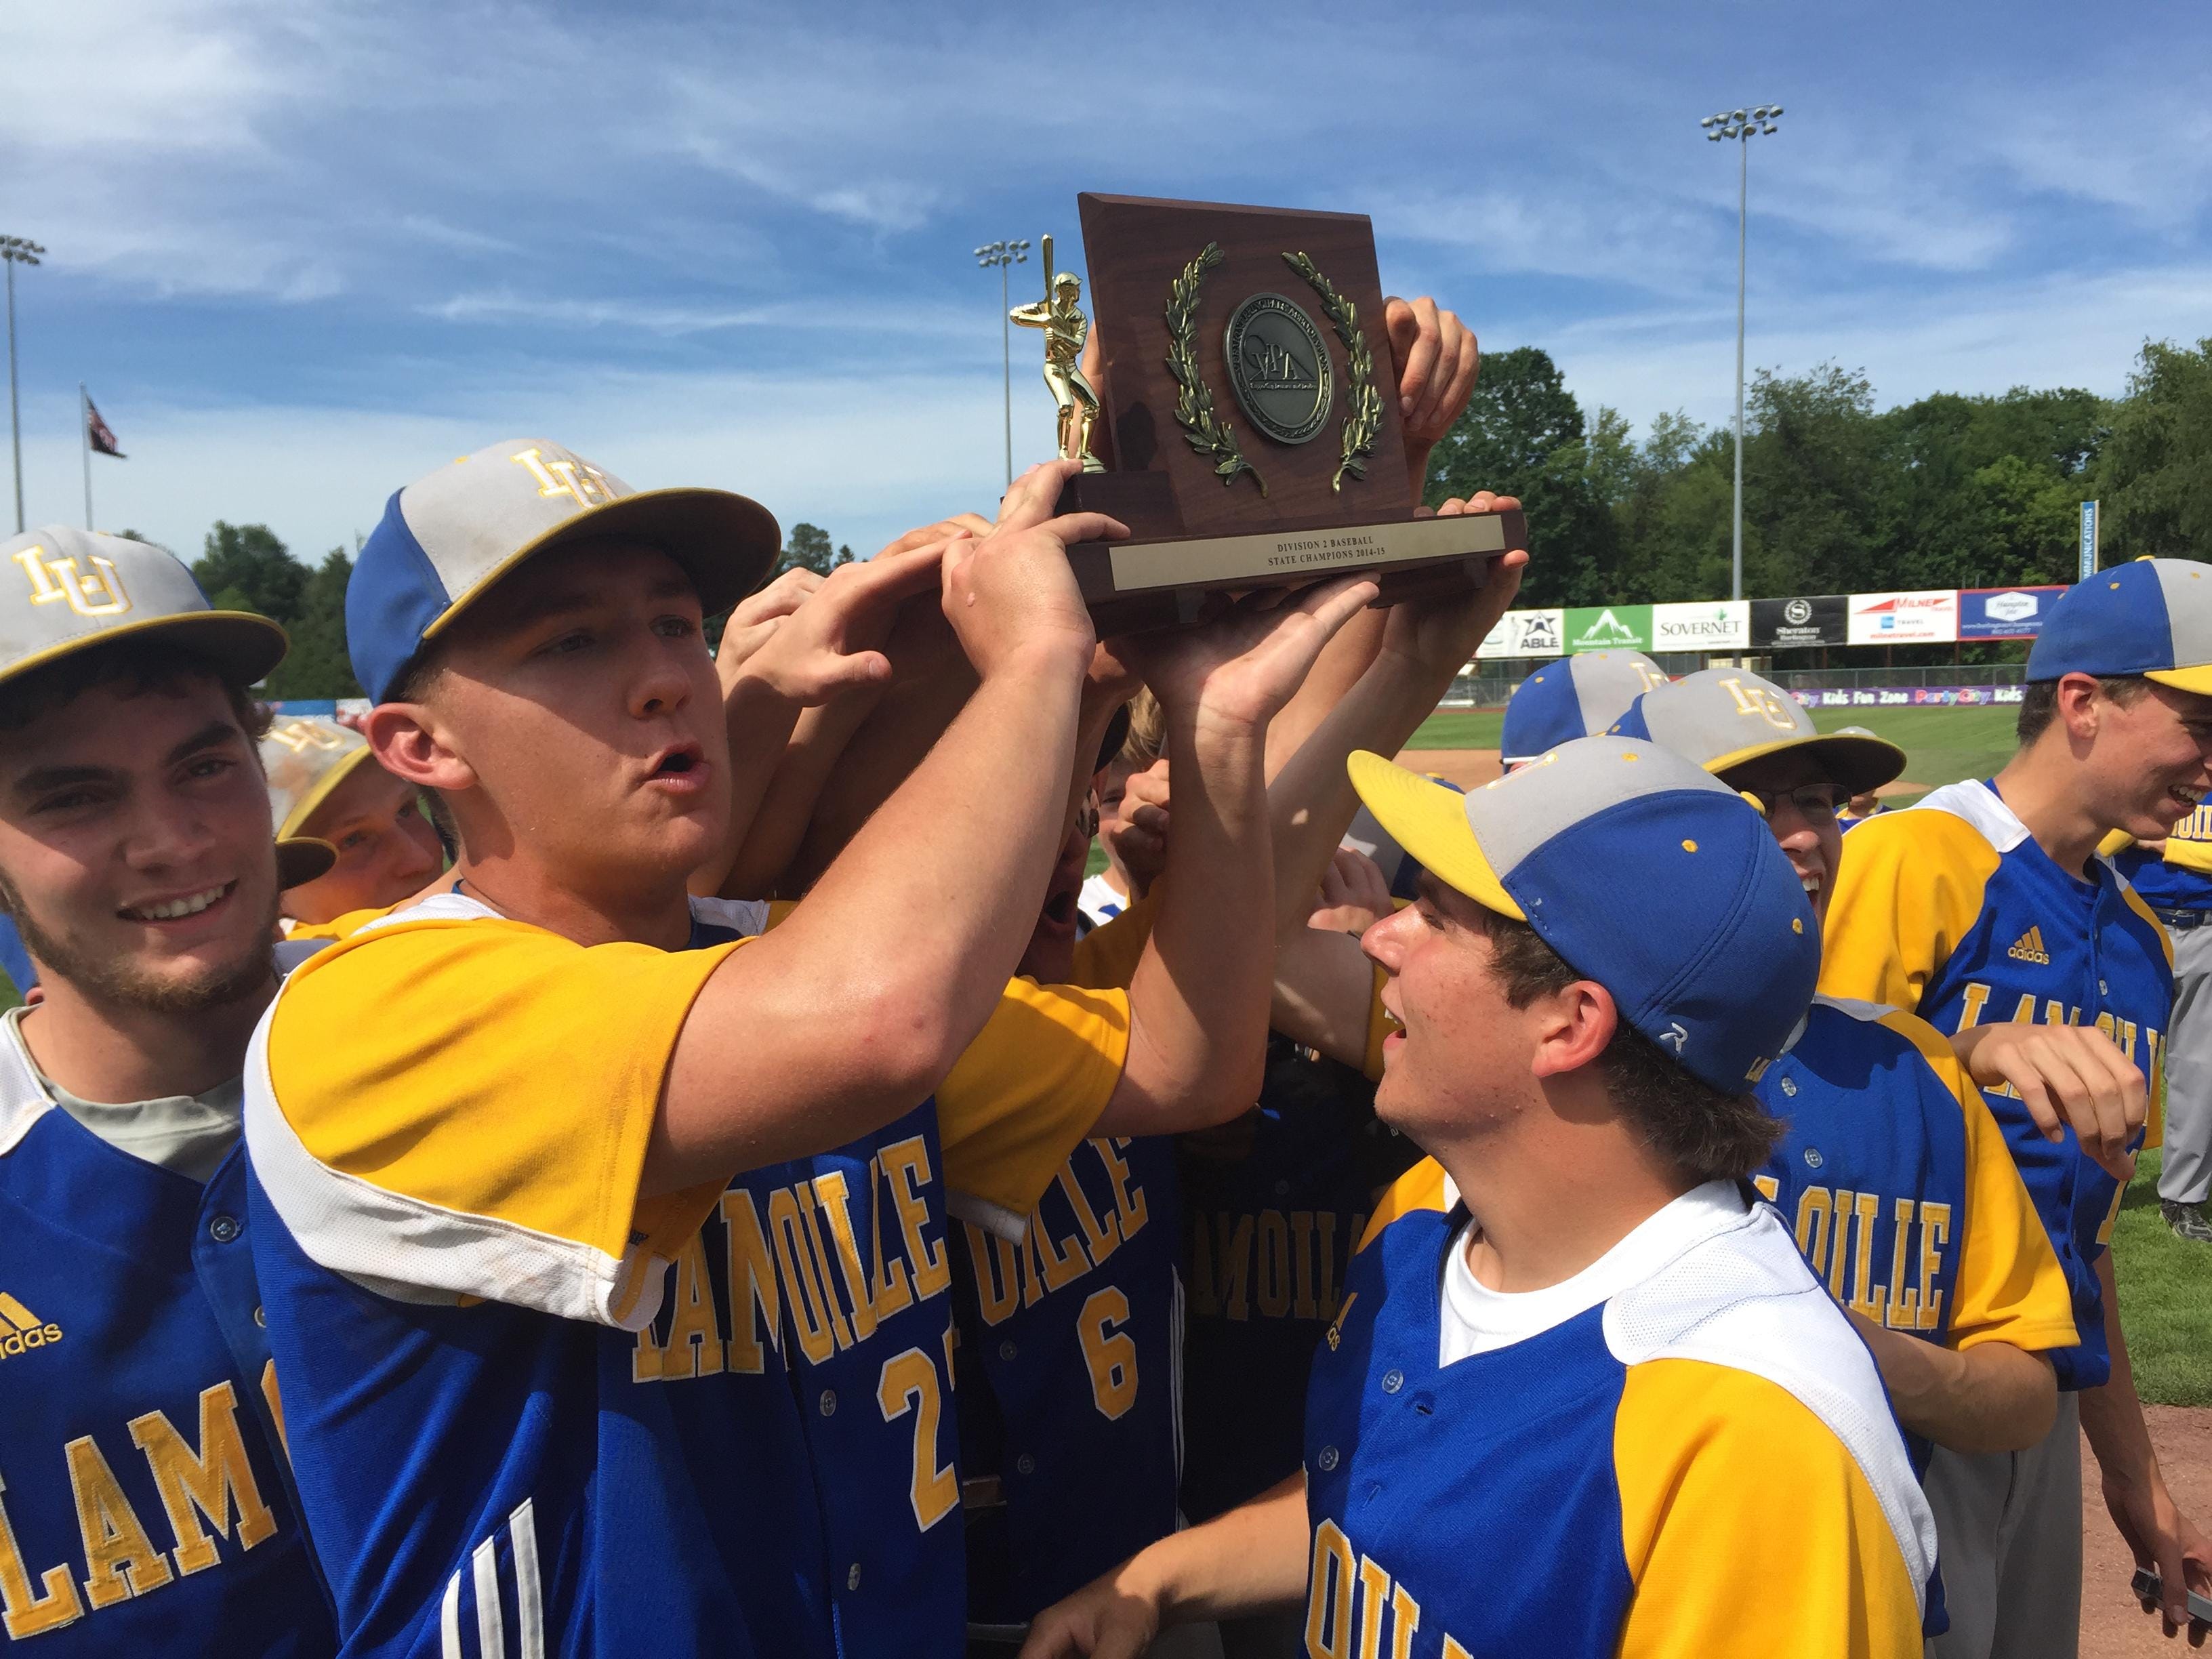 The Lamoille baseball team lifts the trophy after winning the Division II state championship.